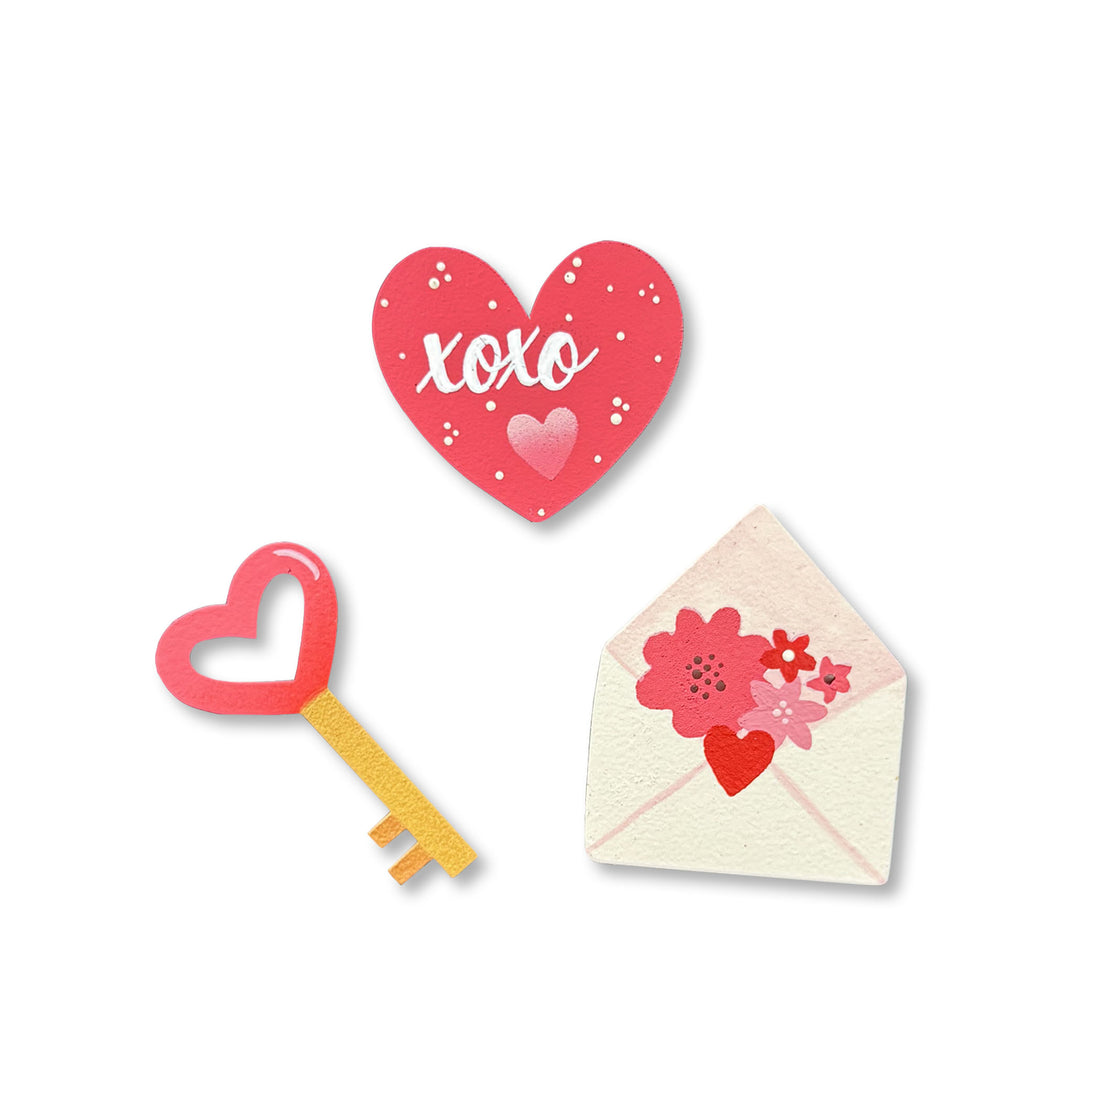 Key to my Heart Magnets S/3